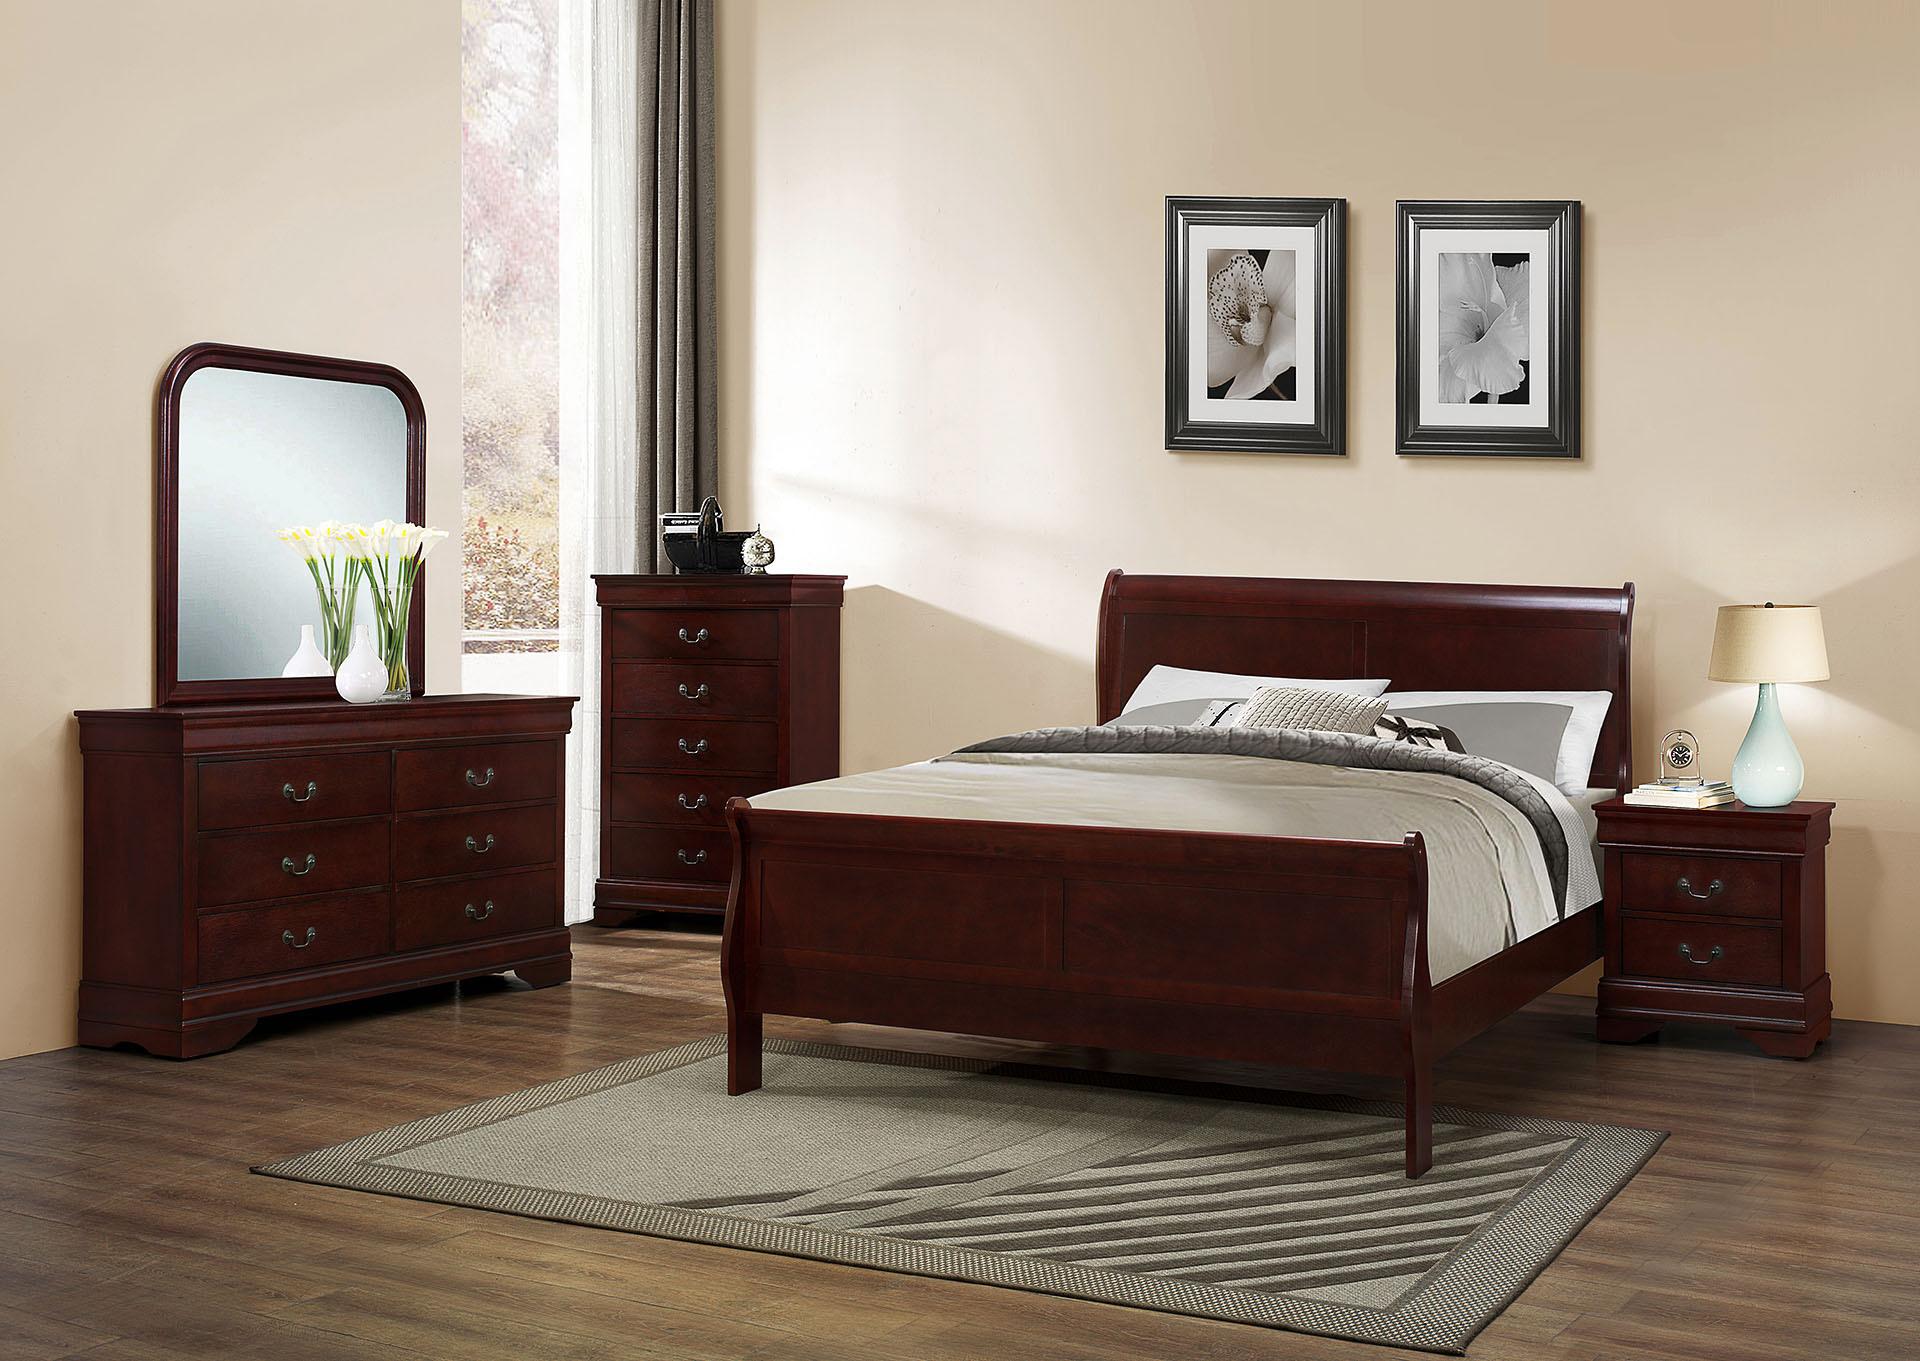 

    
Cherry King Bedroom Set 4 Pcs LOUIS PHILLIPE Galaxy Home Traditional Modern
